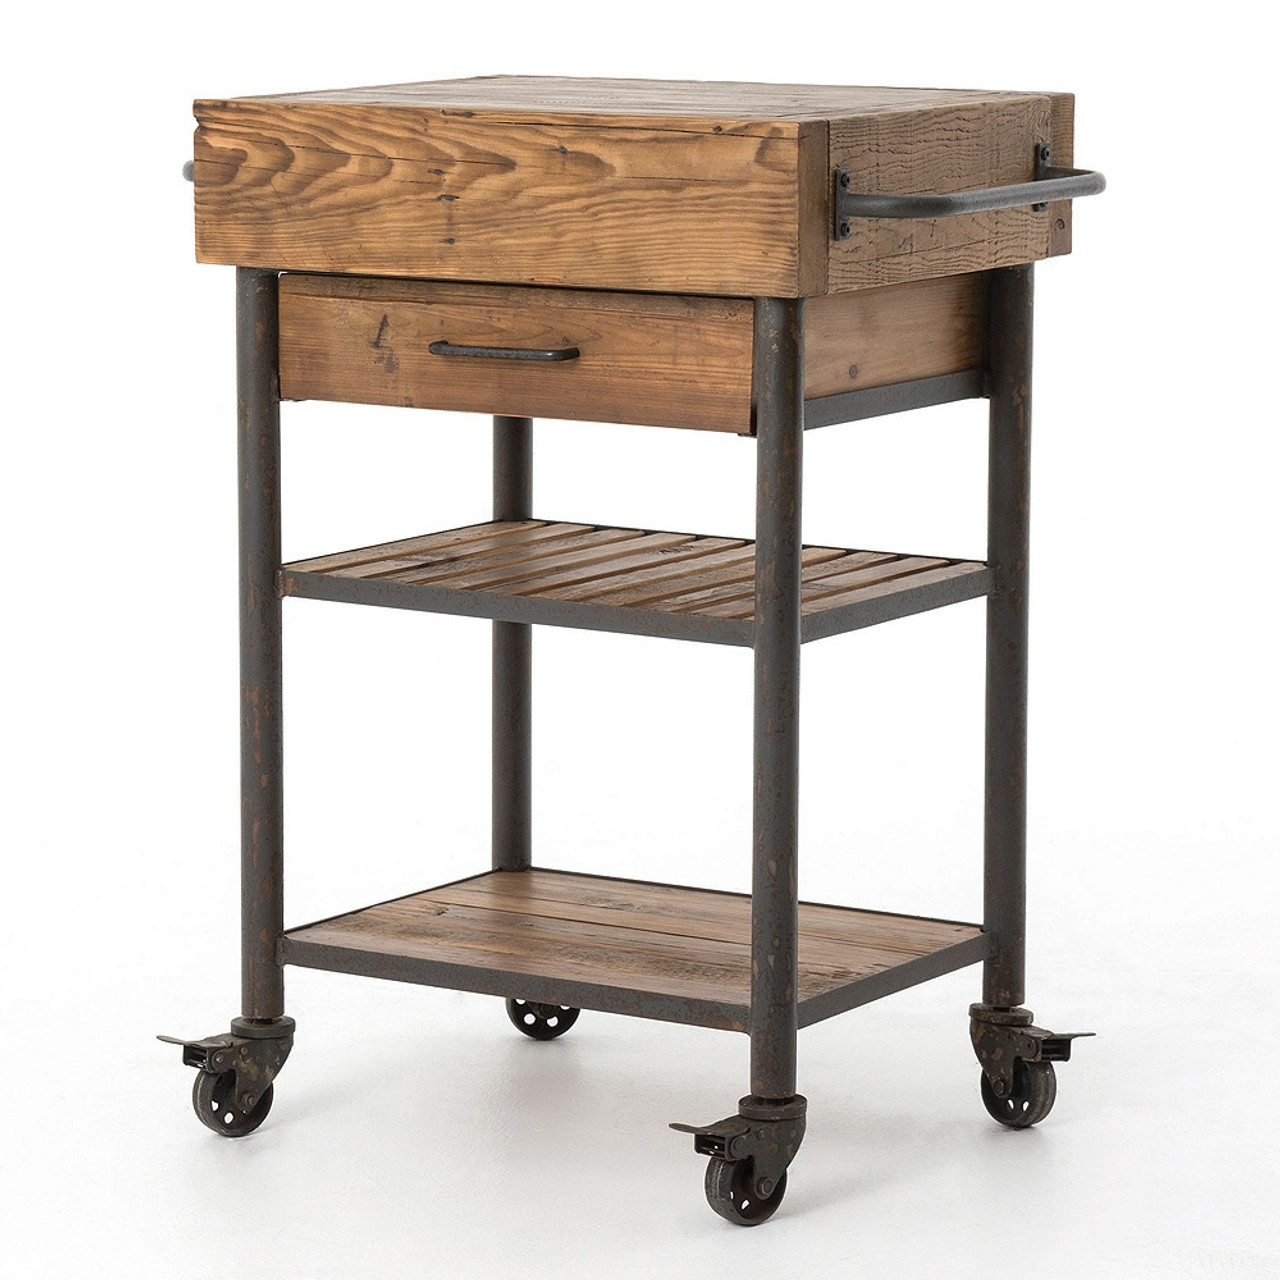 Industrial Reclaimed Wood Kitchen Island Cart With Drawer  36764.1429610193 ?c=2